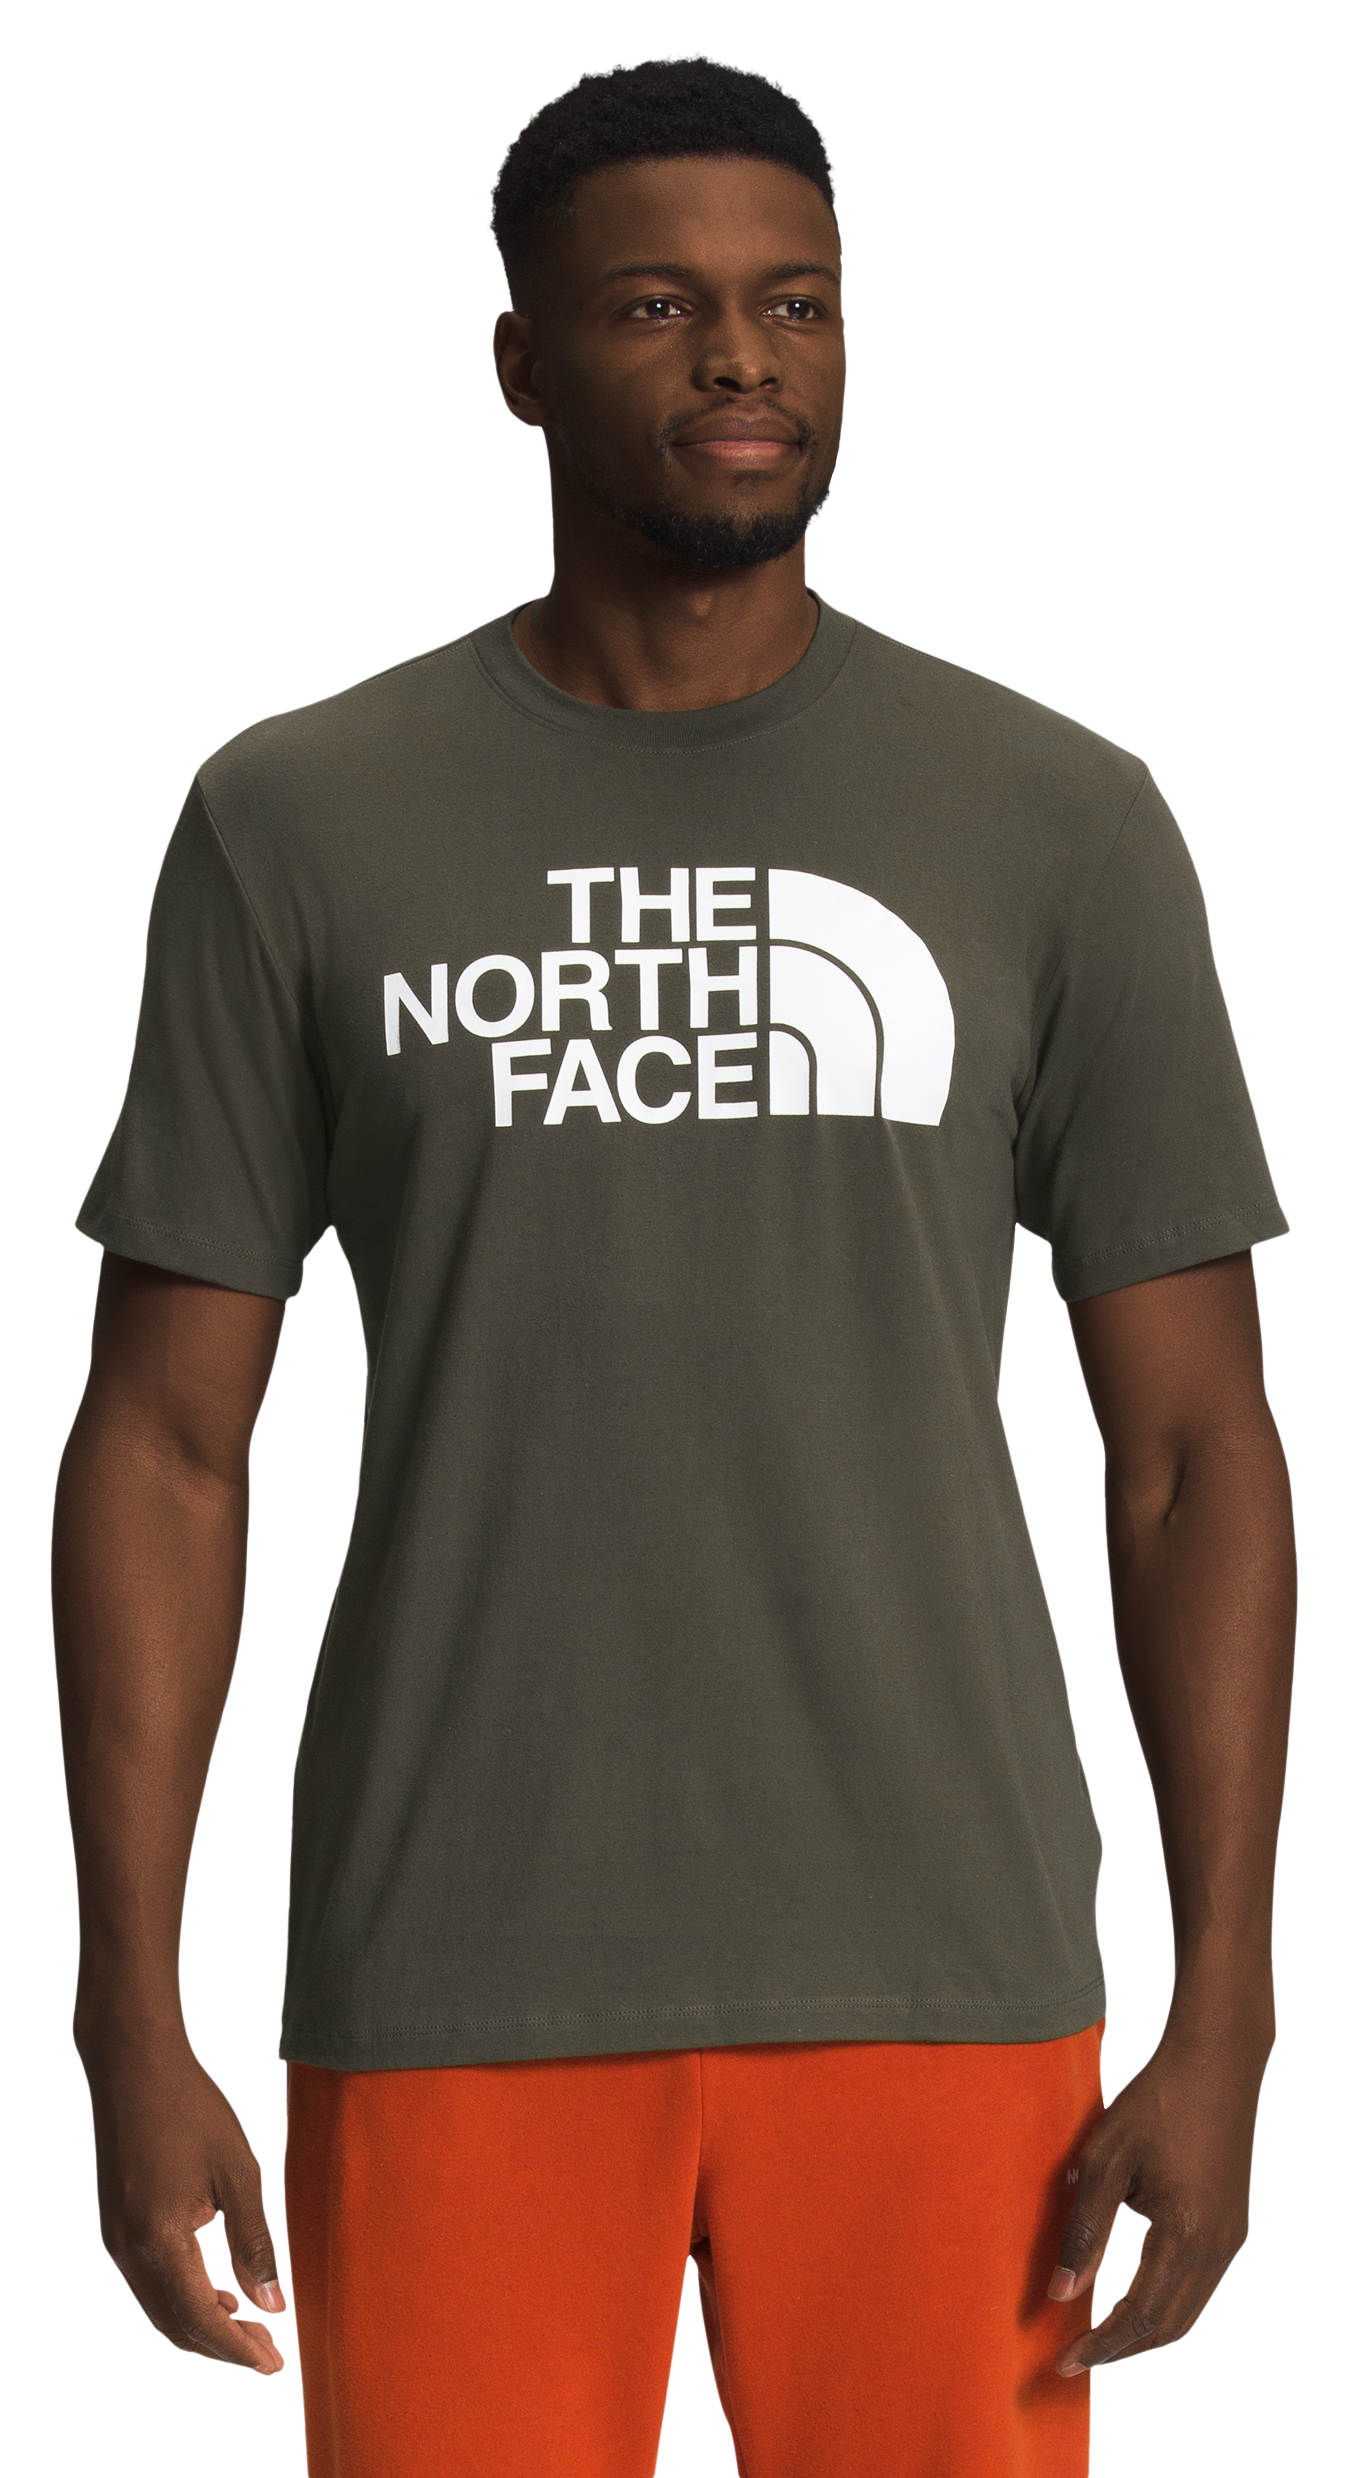 The North Face Half Dome Short-Sleeve T-Shirt for Men - New Taupe Green/White - 2XL